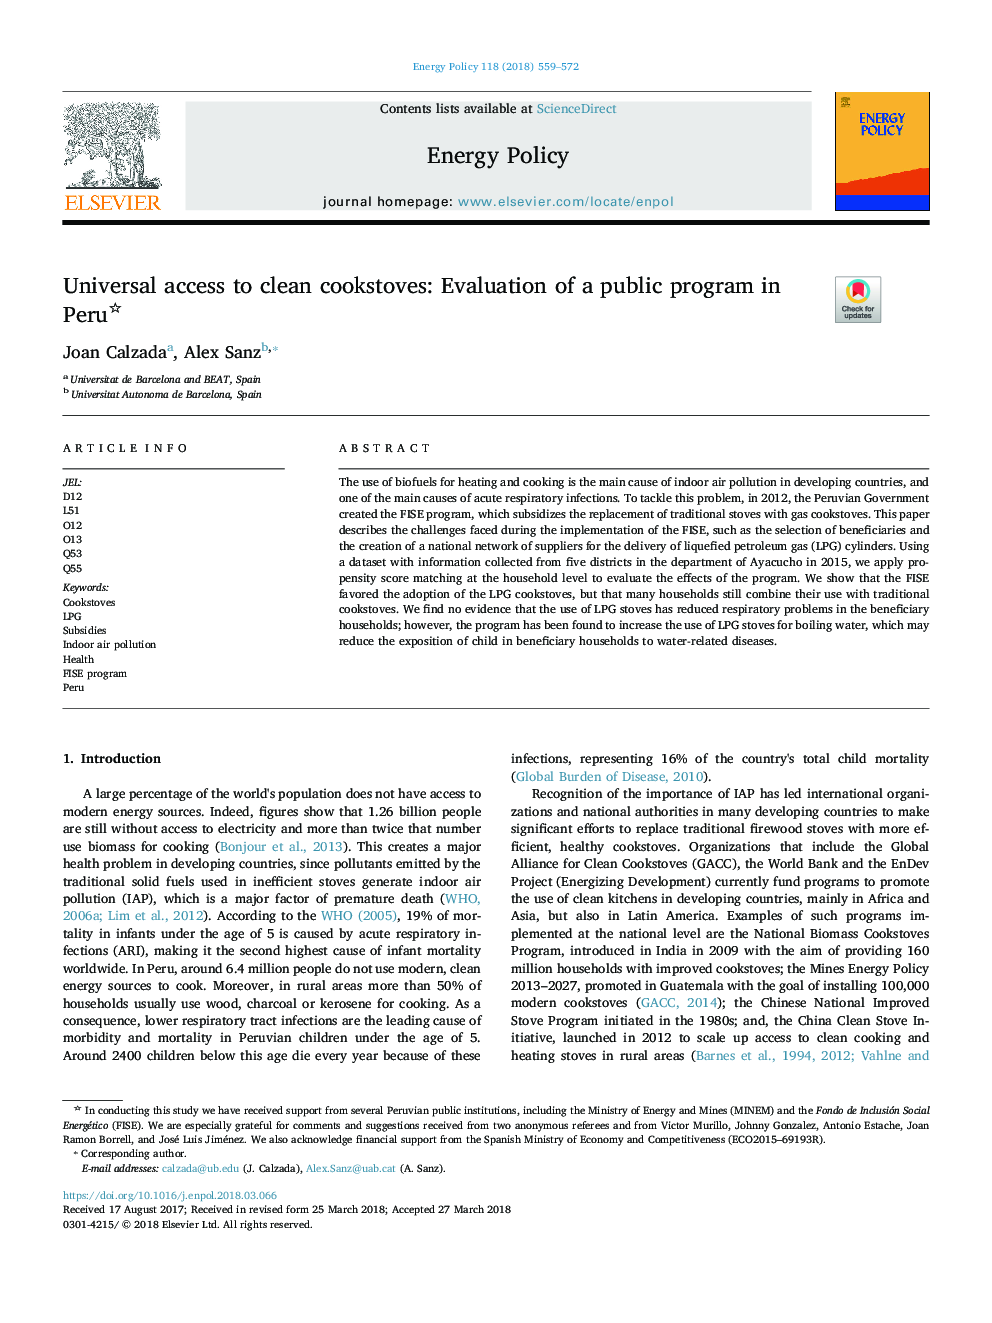 Universal access to clean cookstoves: Evaluation of a public program in Peru